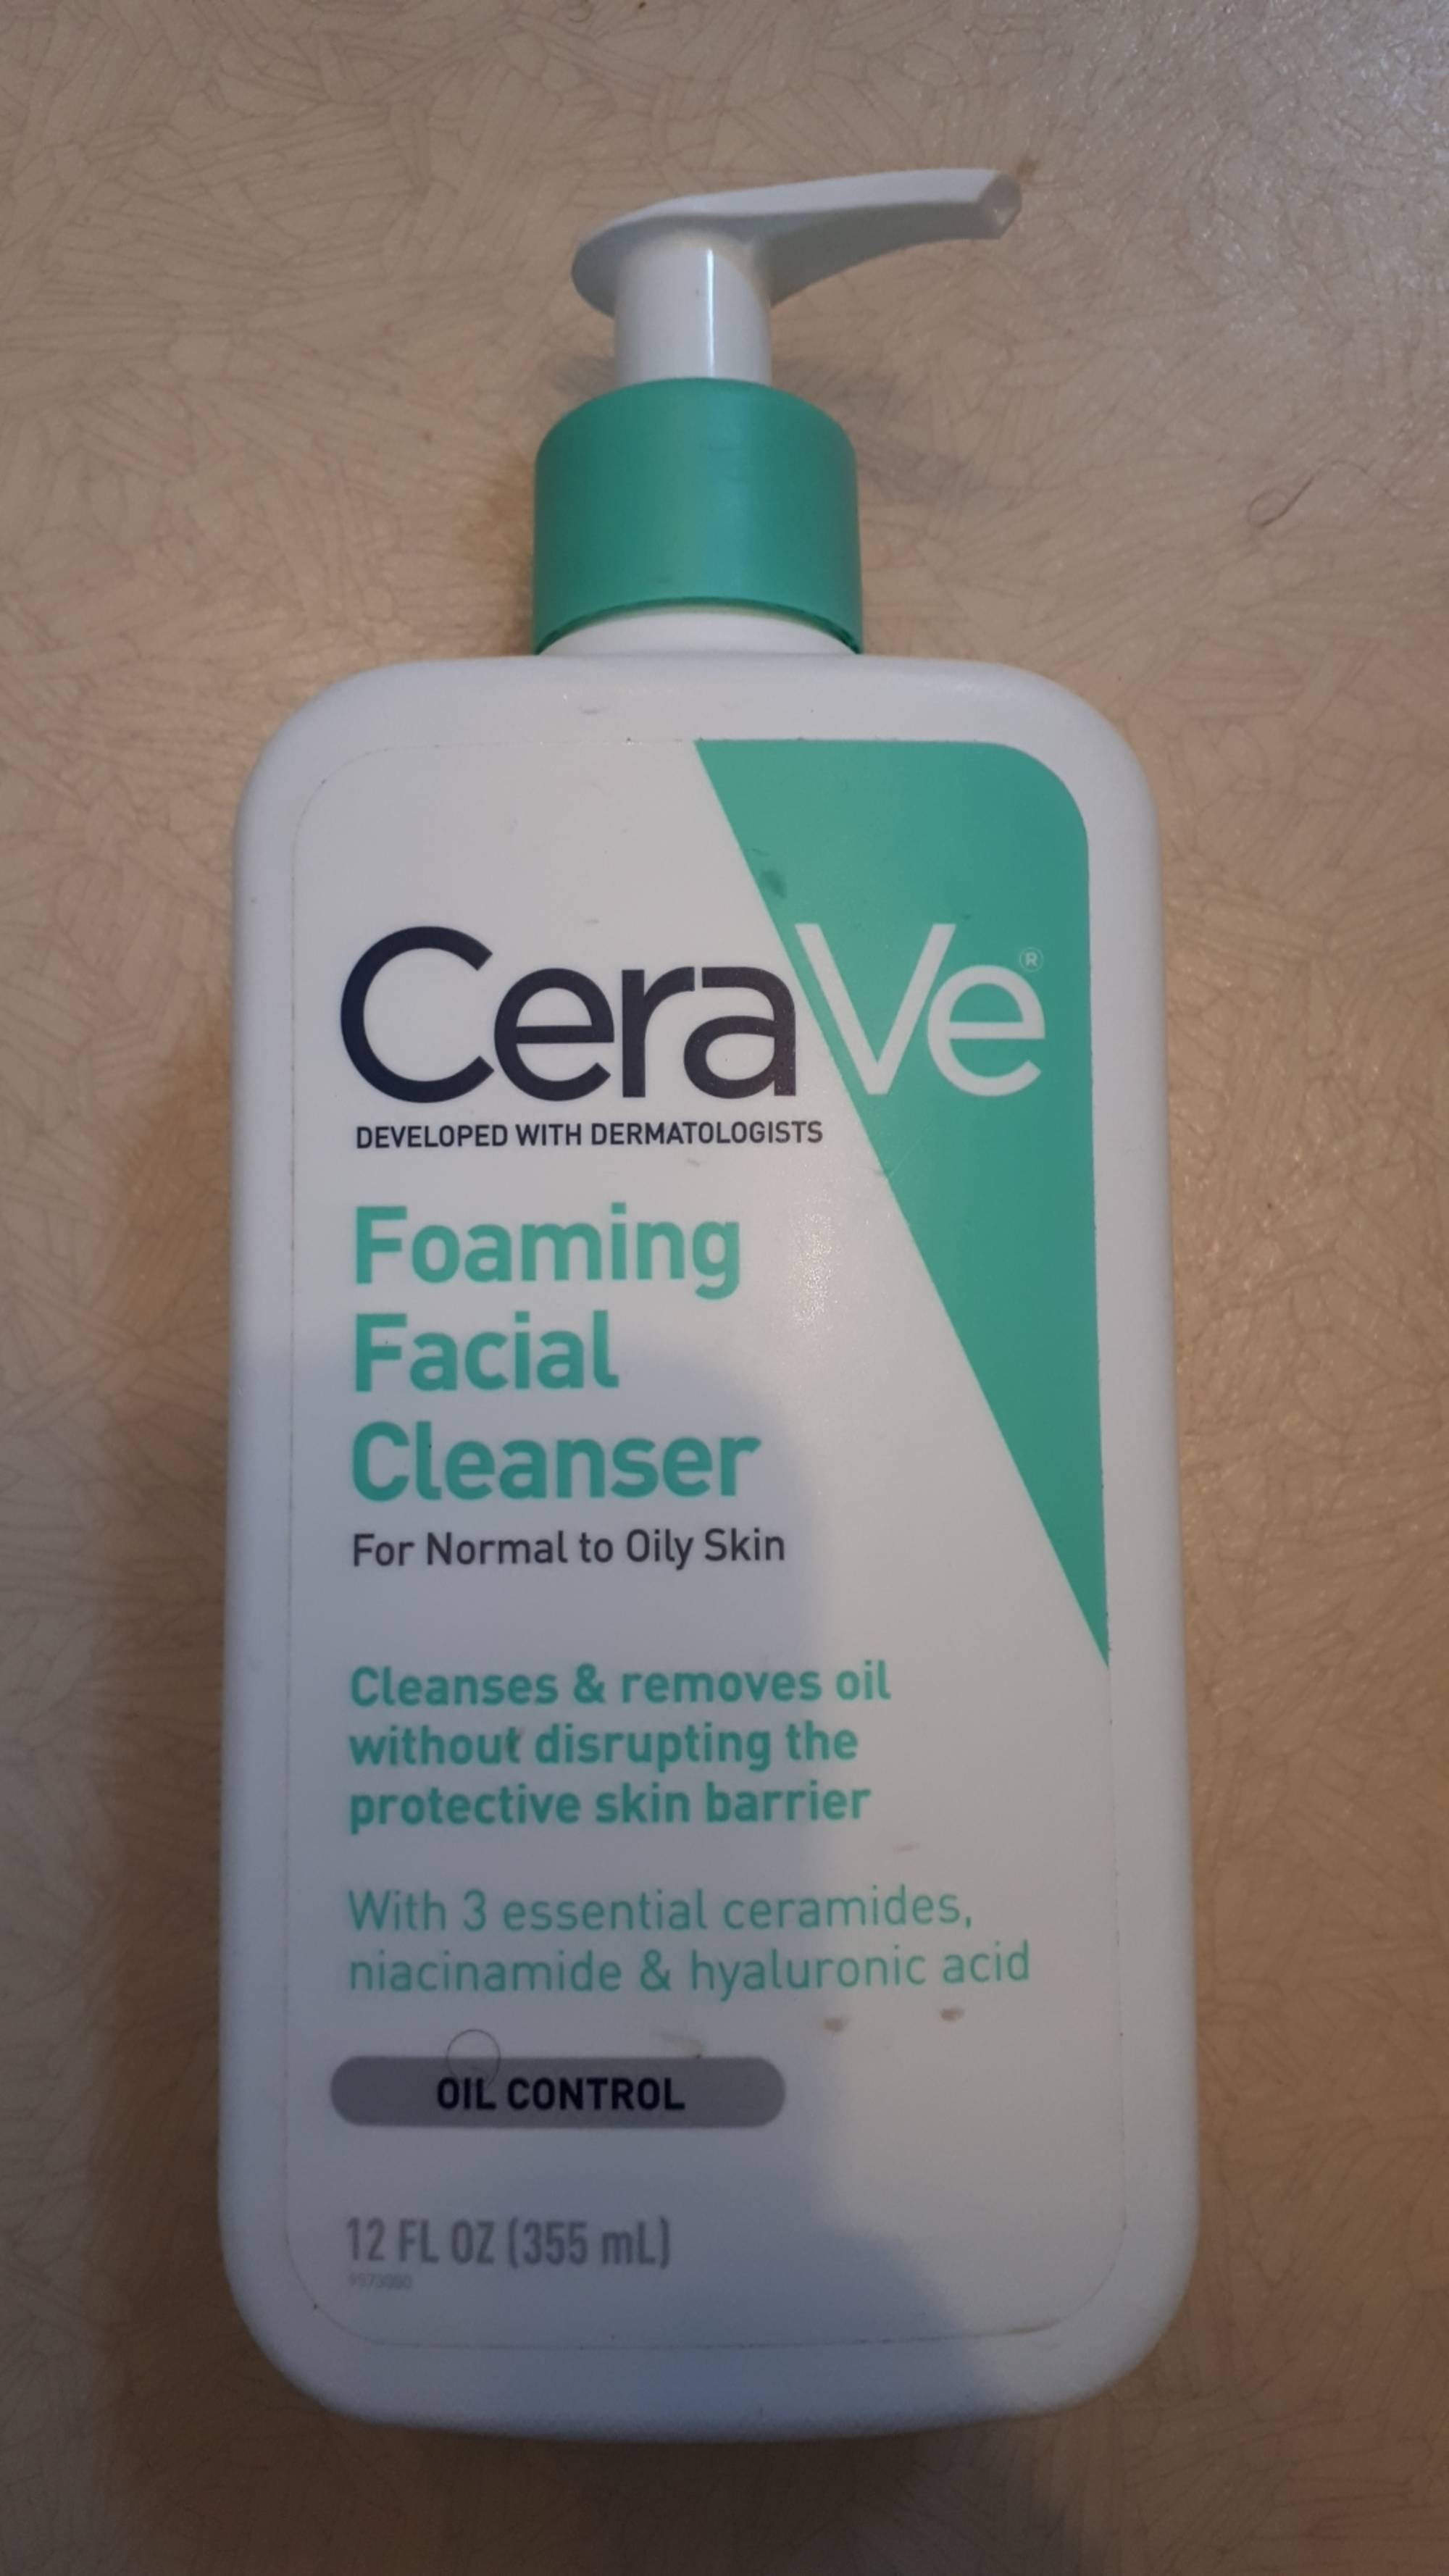 CERAVÉ - Foaming facial cleanser for normal to oily skin